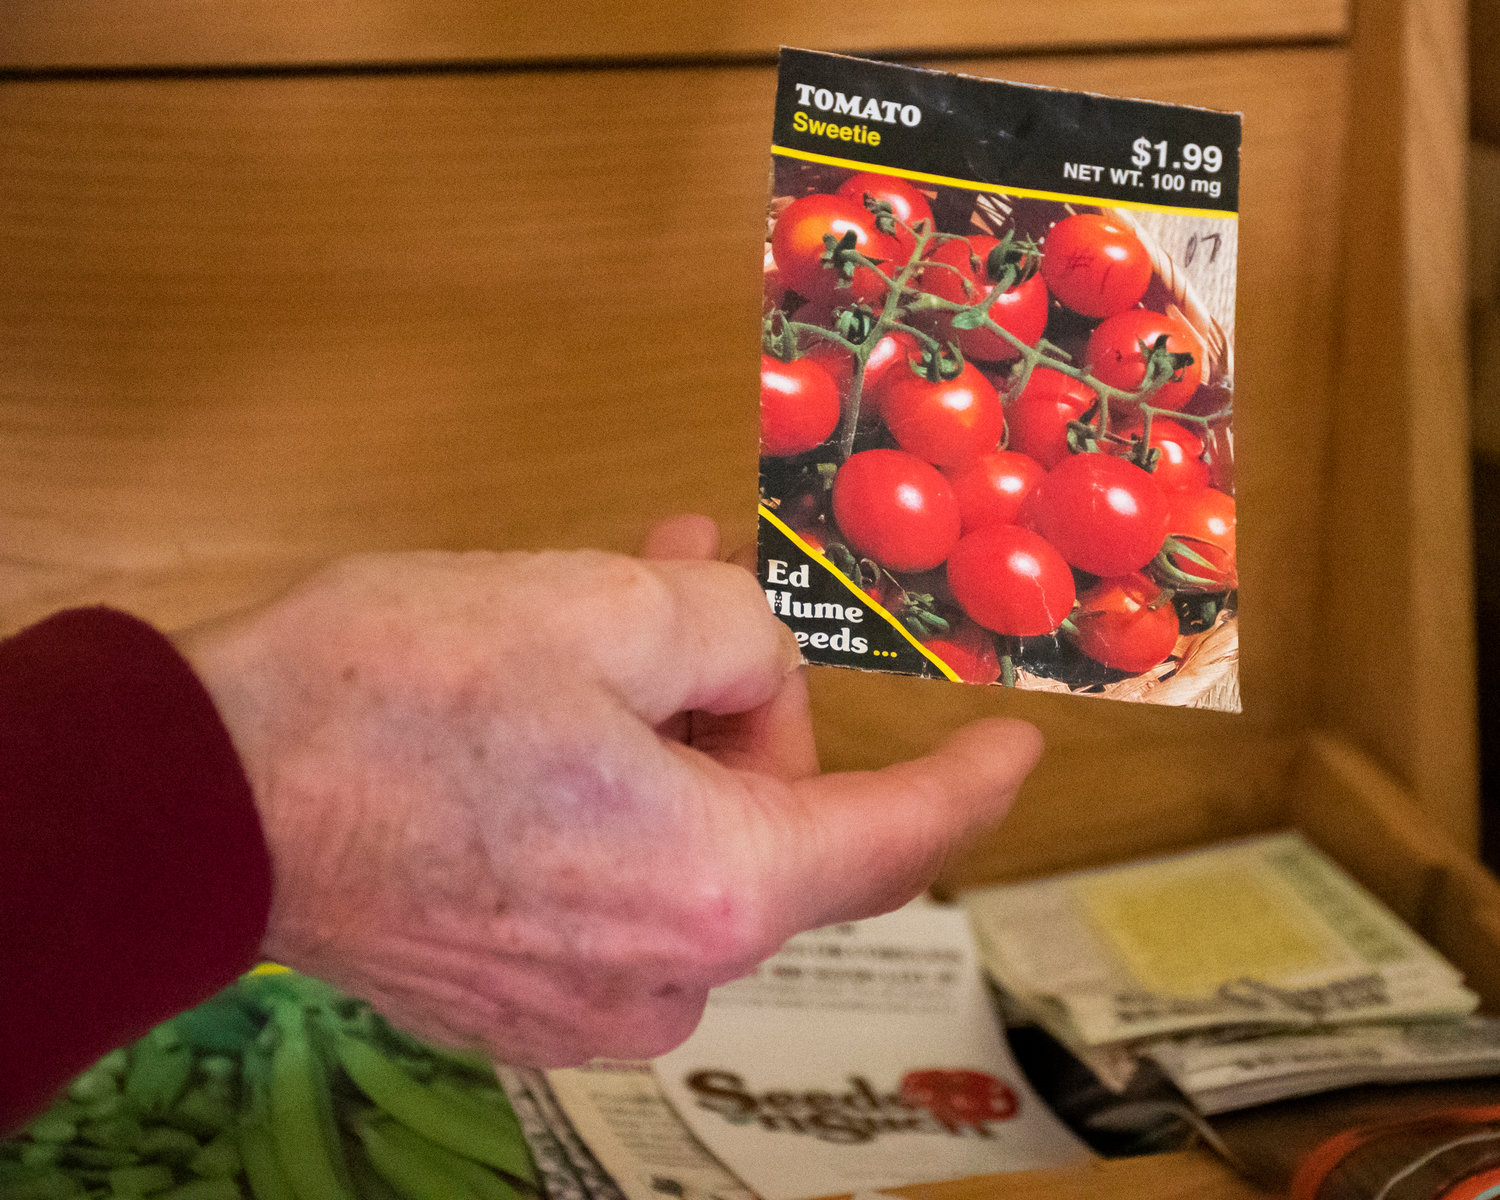 Gayle Schilling holds up a packet of seeds from a box Tuesday morning in her home.